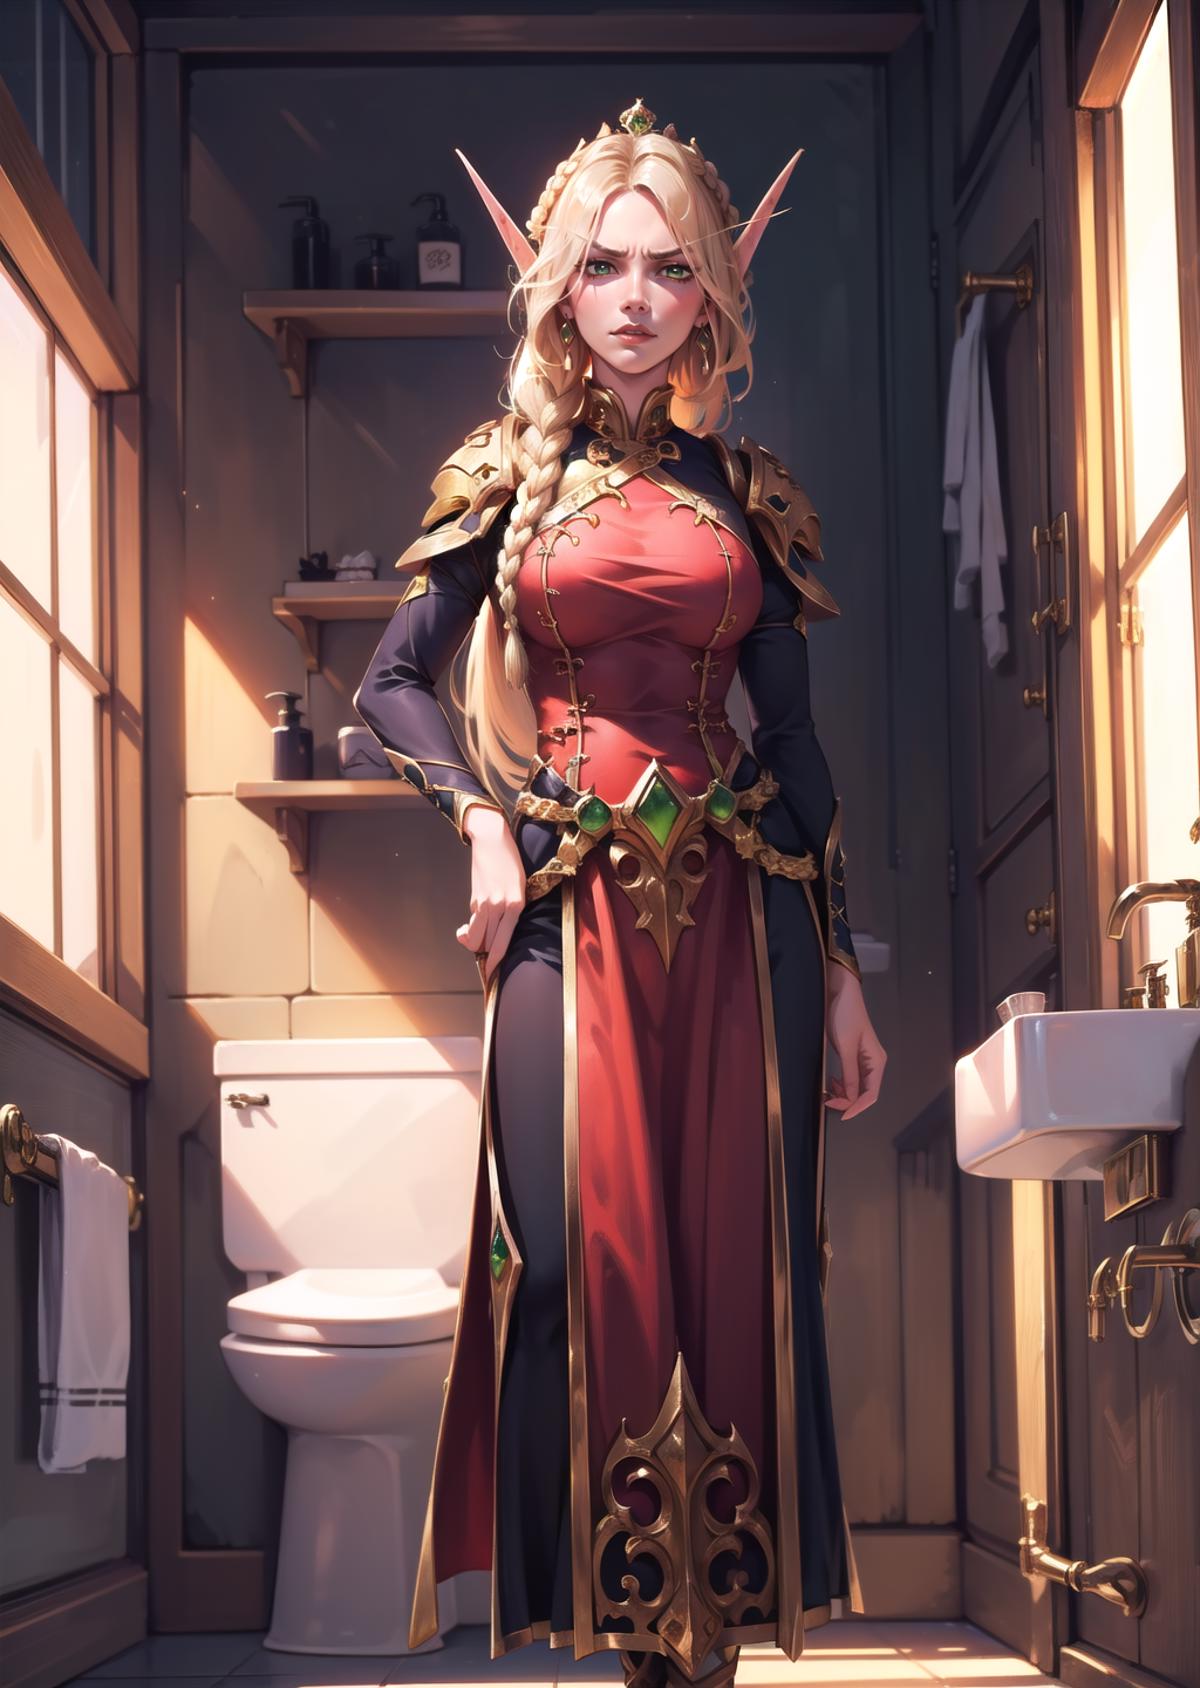 Blood Elves image by Barons